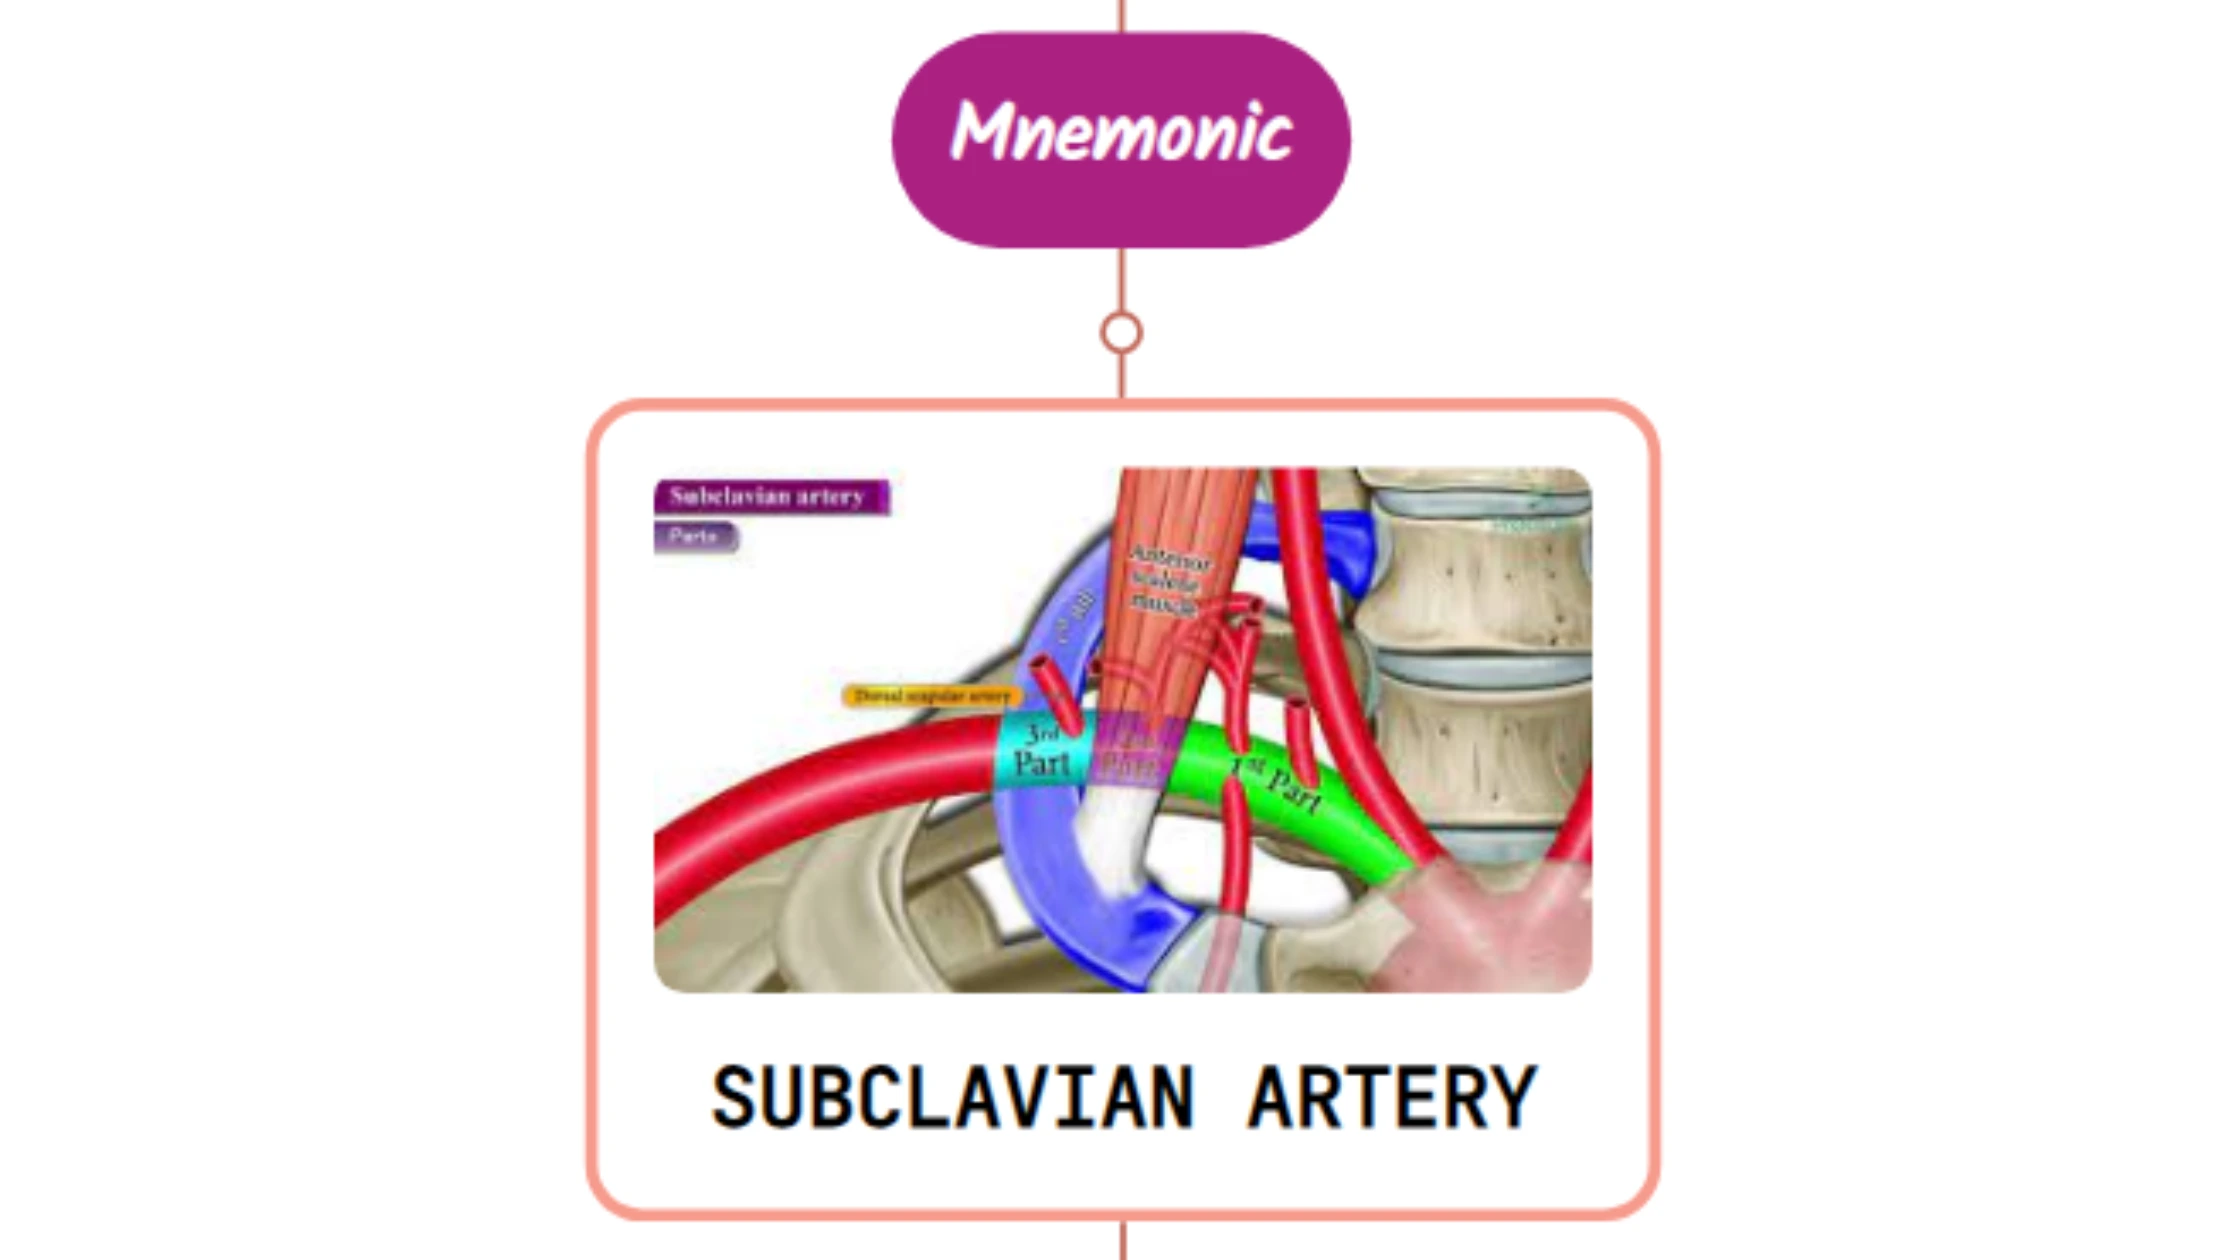 You are currently viewing Subclavian Artery – Mnemonic